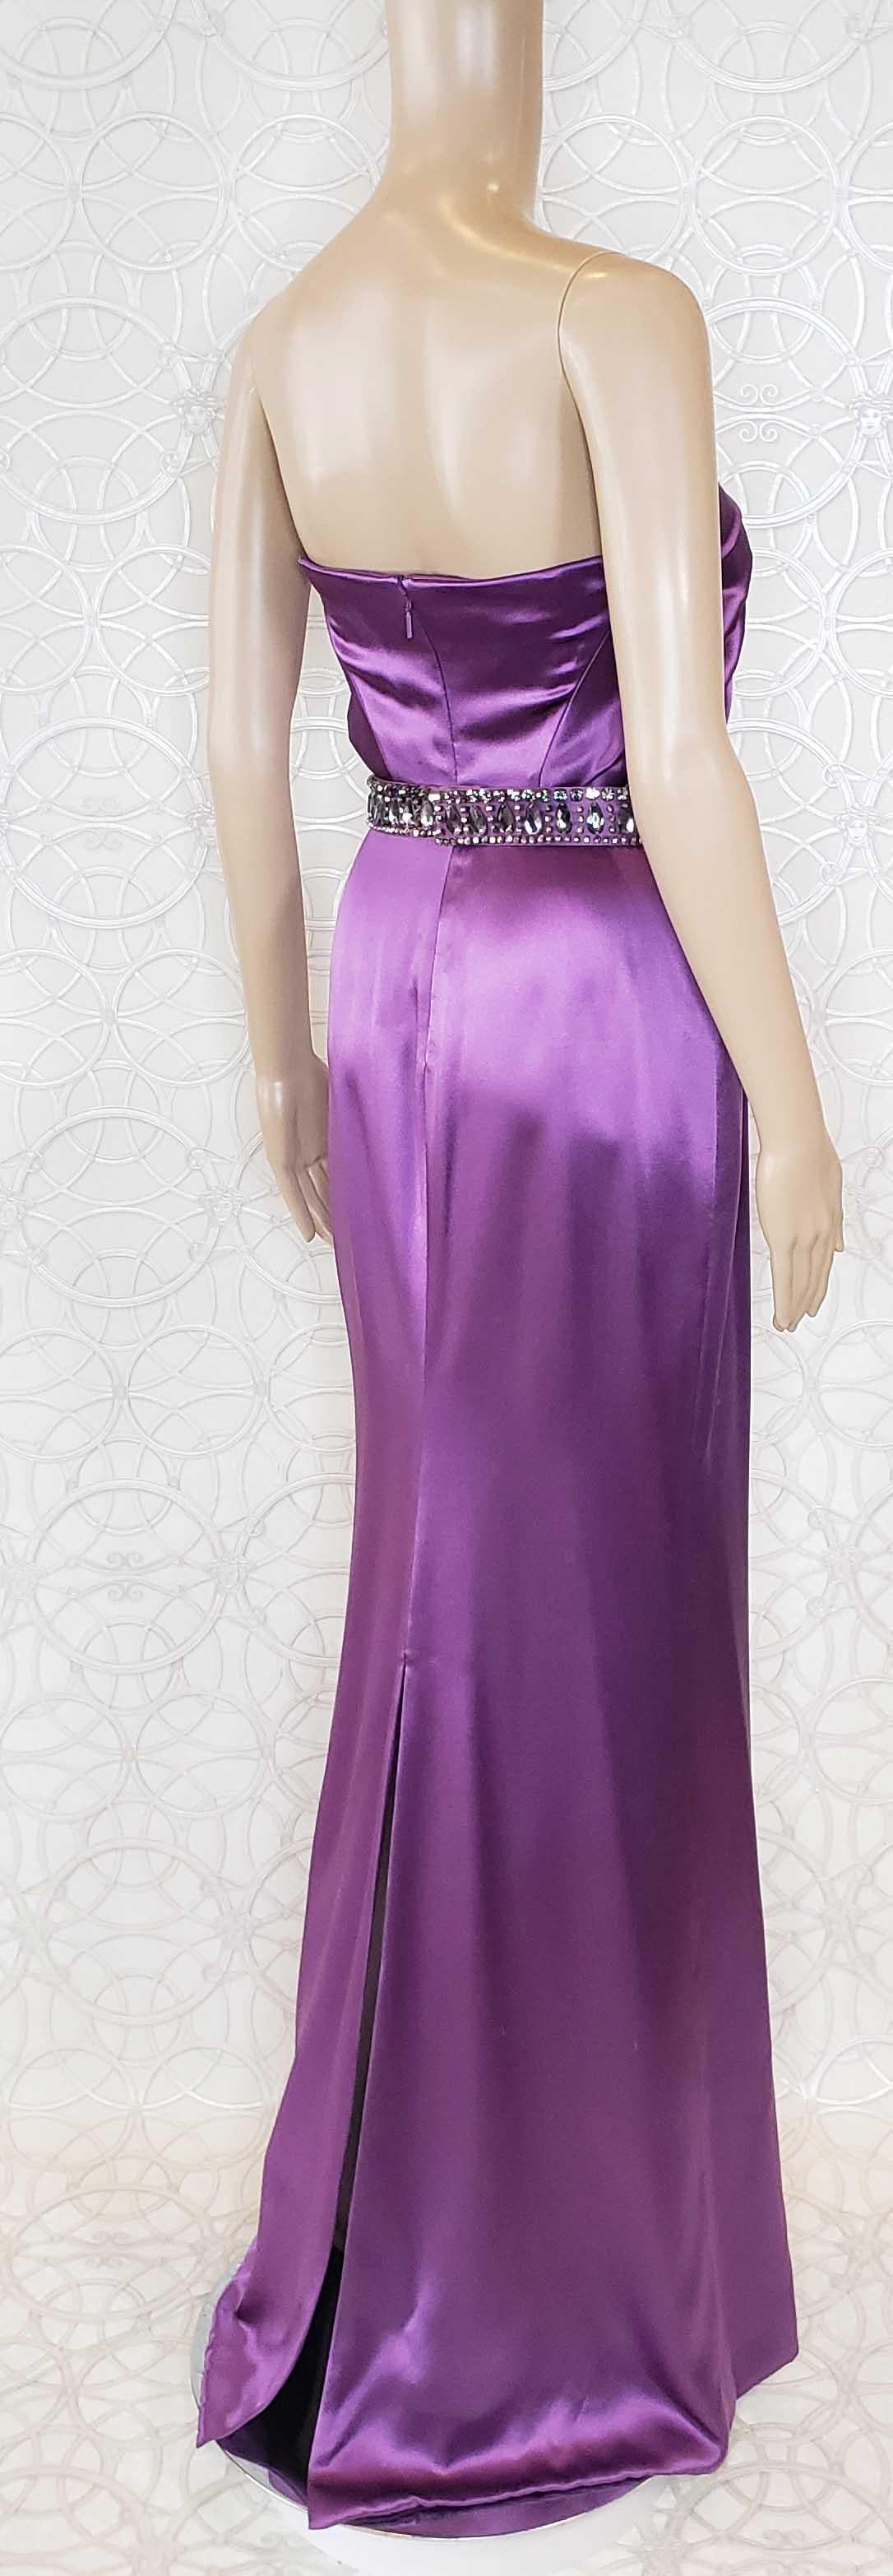 NEW VERSACE EMBELLISHED AMETHYST STRAPLESS GOWN DRESS EVA WORE IN Paris! 38 - 2 For Sale 1